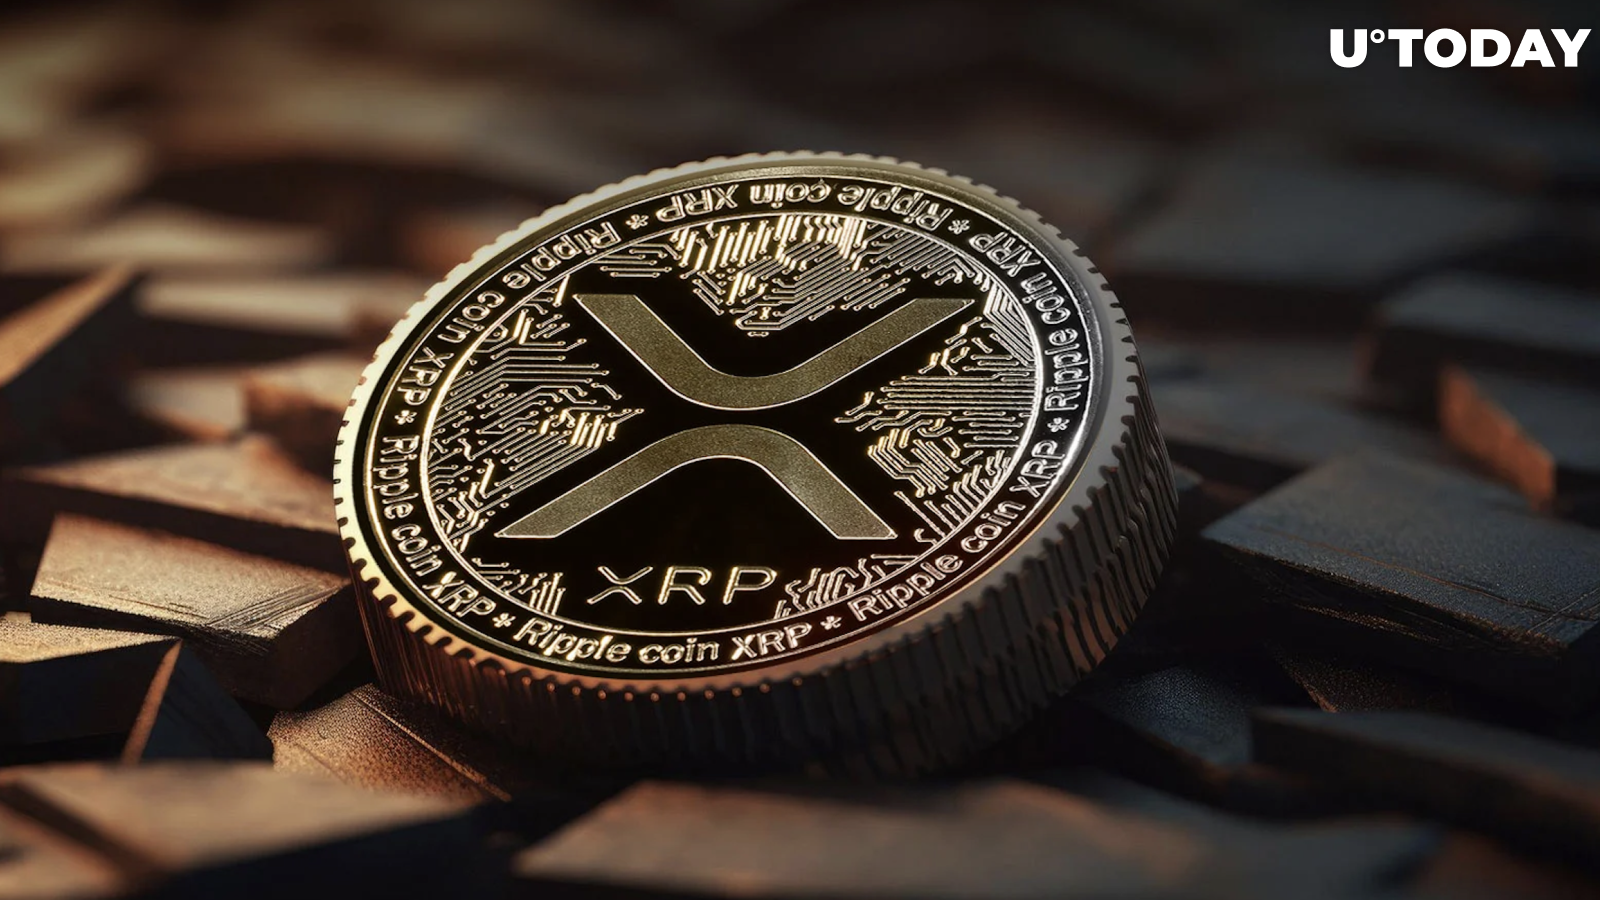 Looking for Next XRP? Pay Attention to Meme Coins, Says Top Analyst